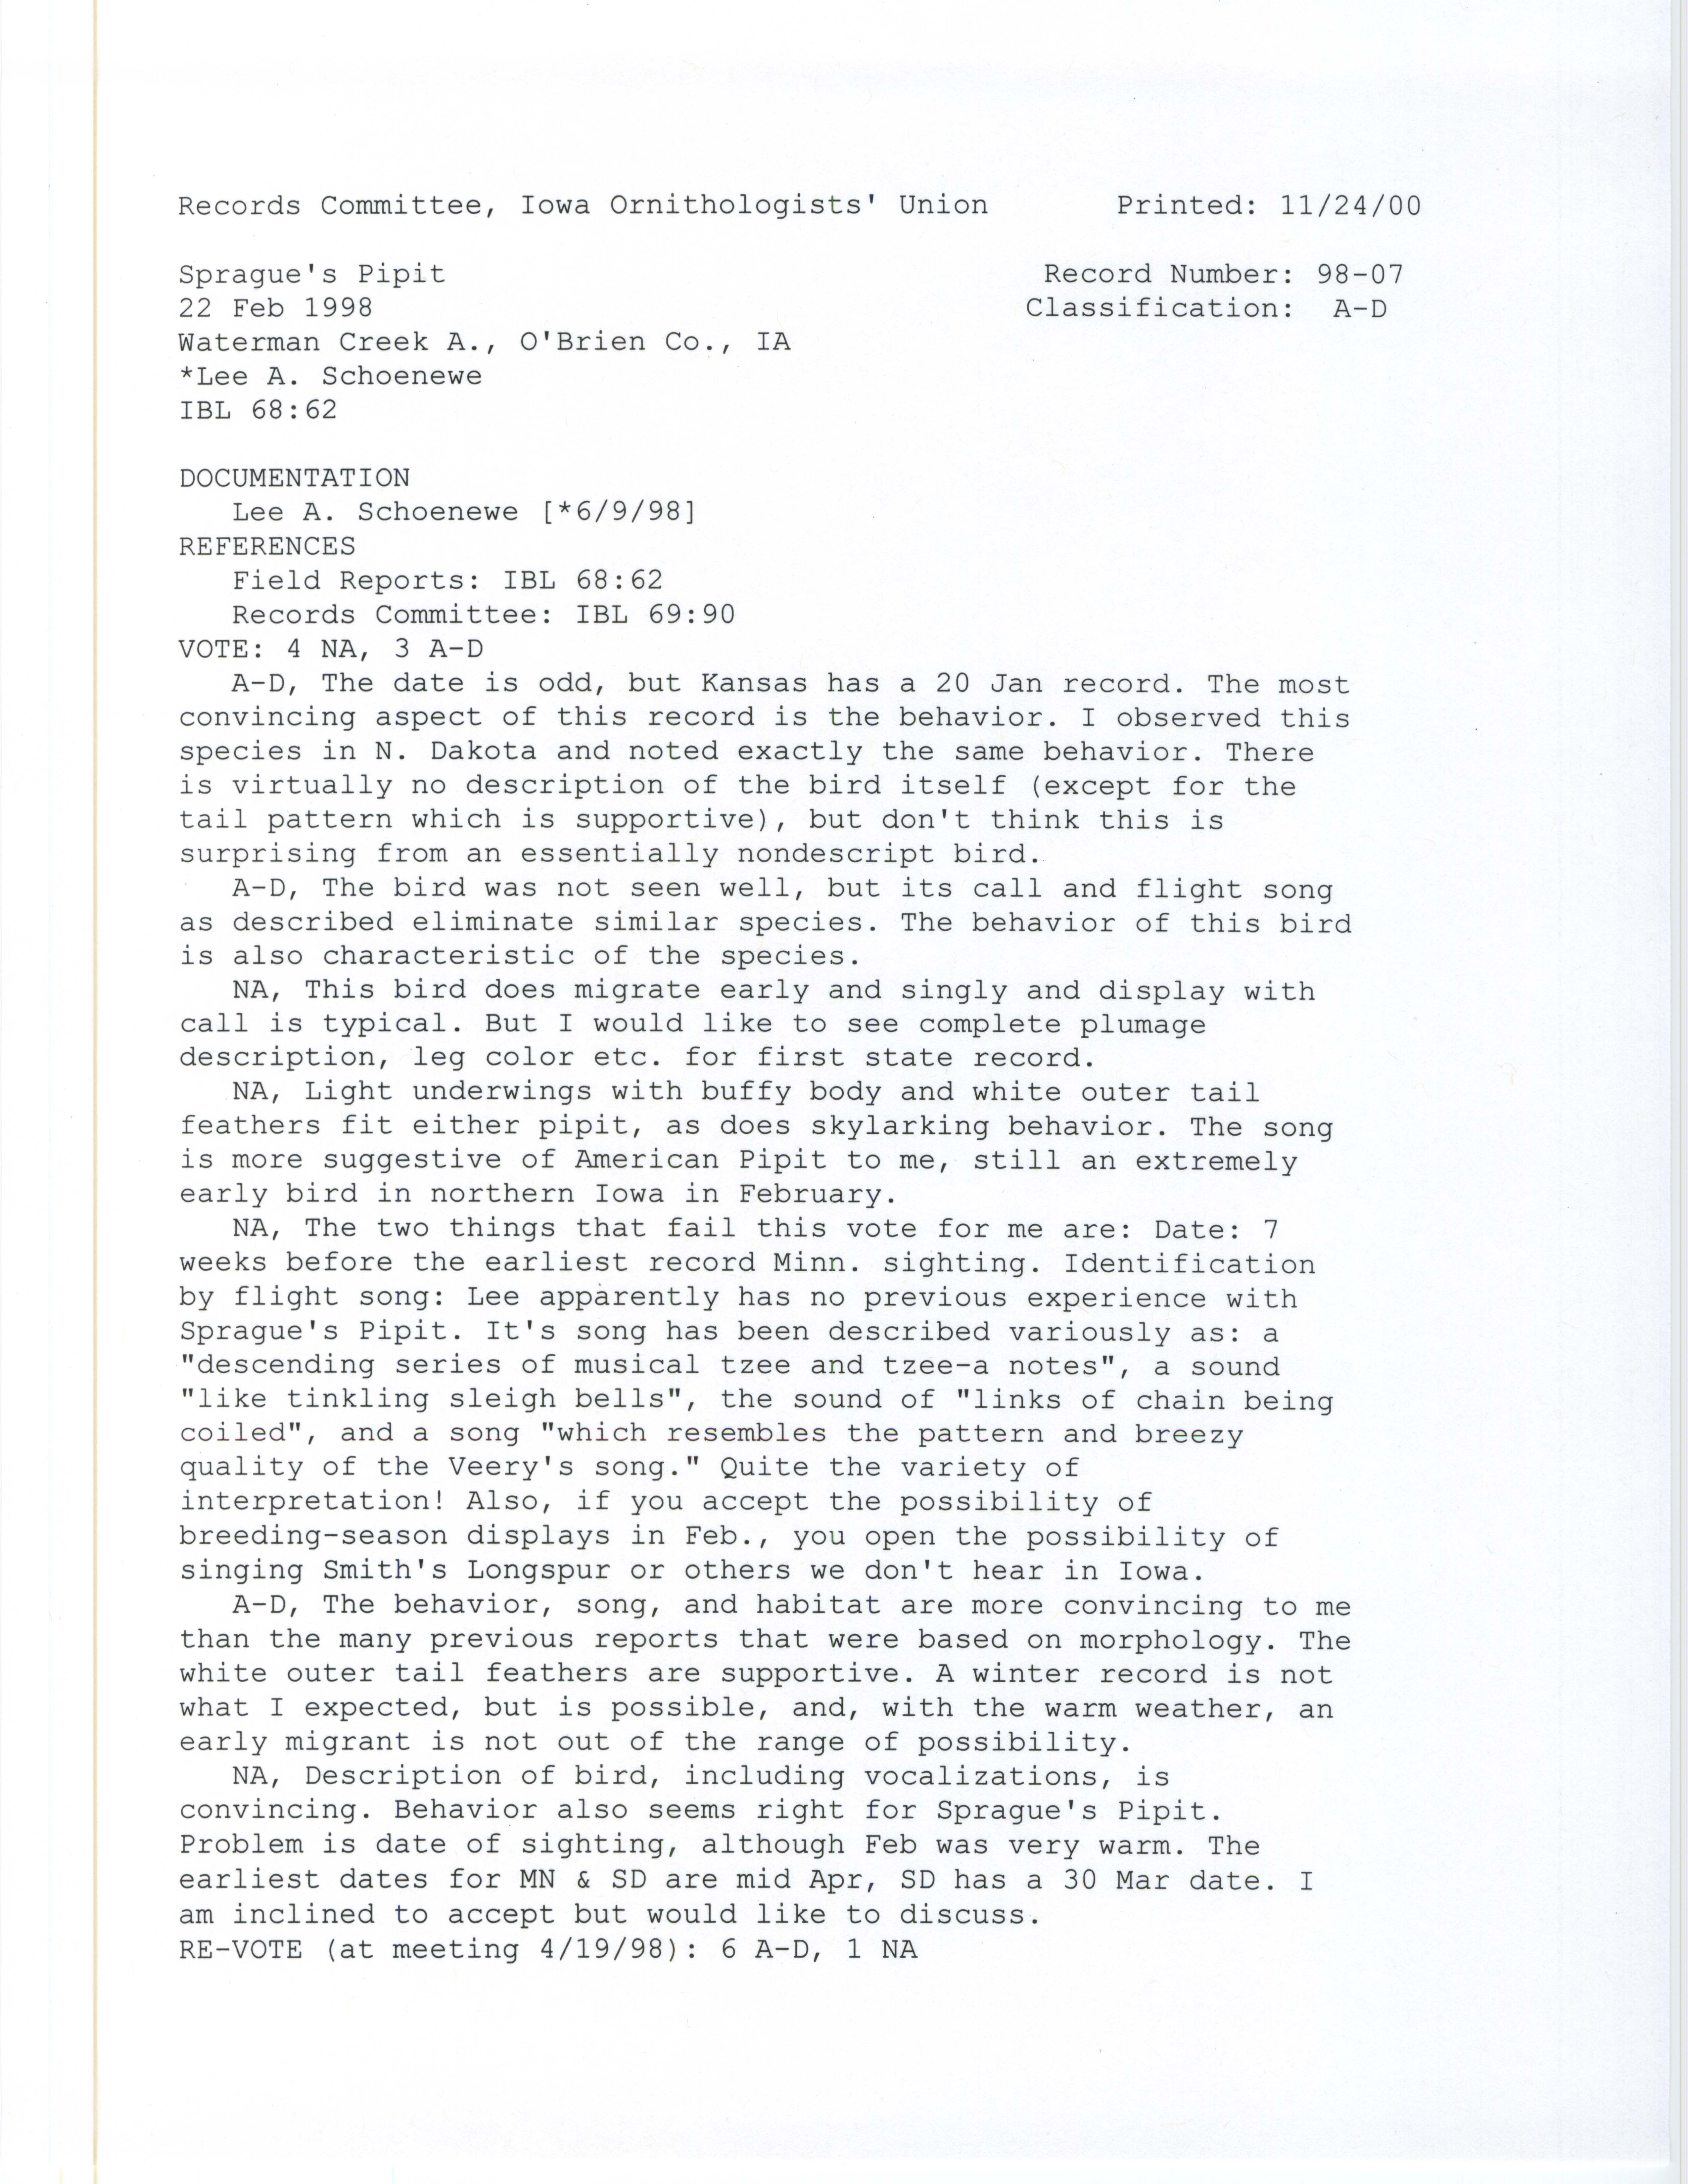 Records Committee review for rare bird sighting for Sprague's Pipit at Waterman Creek Area, 1998